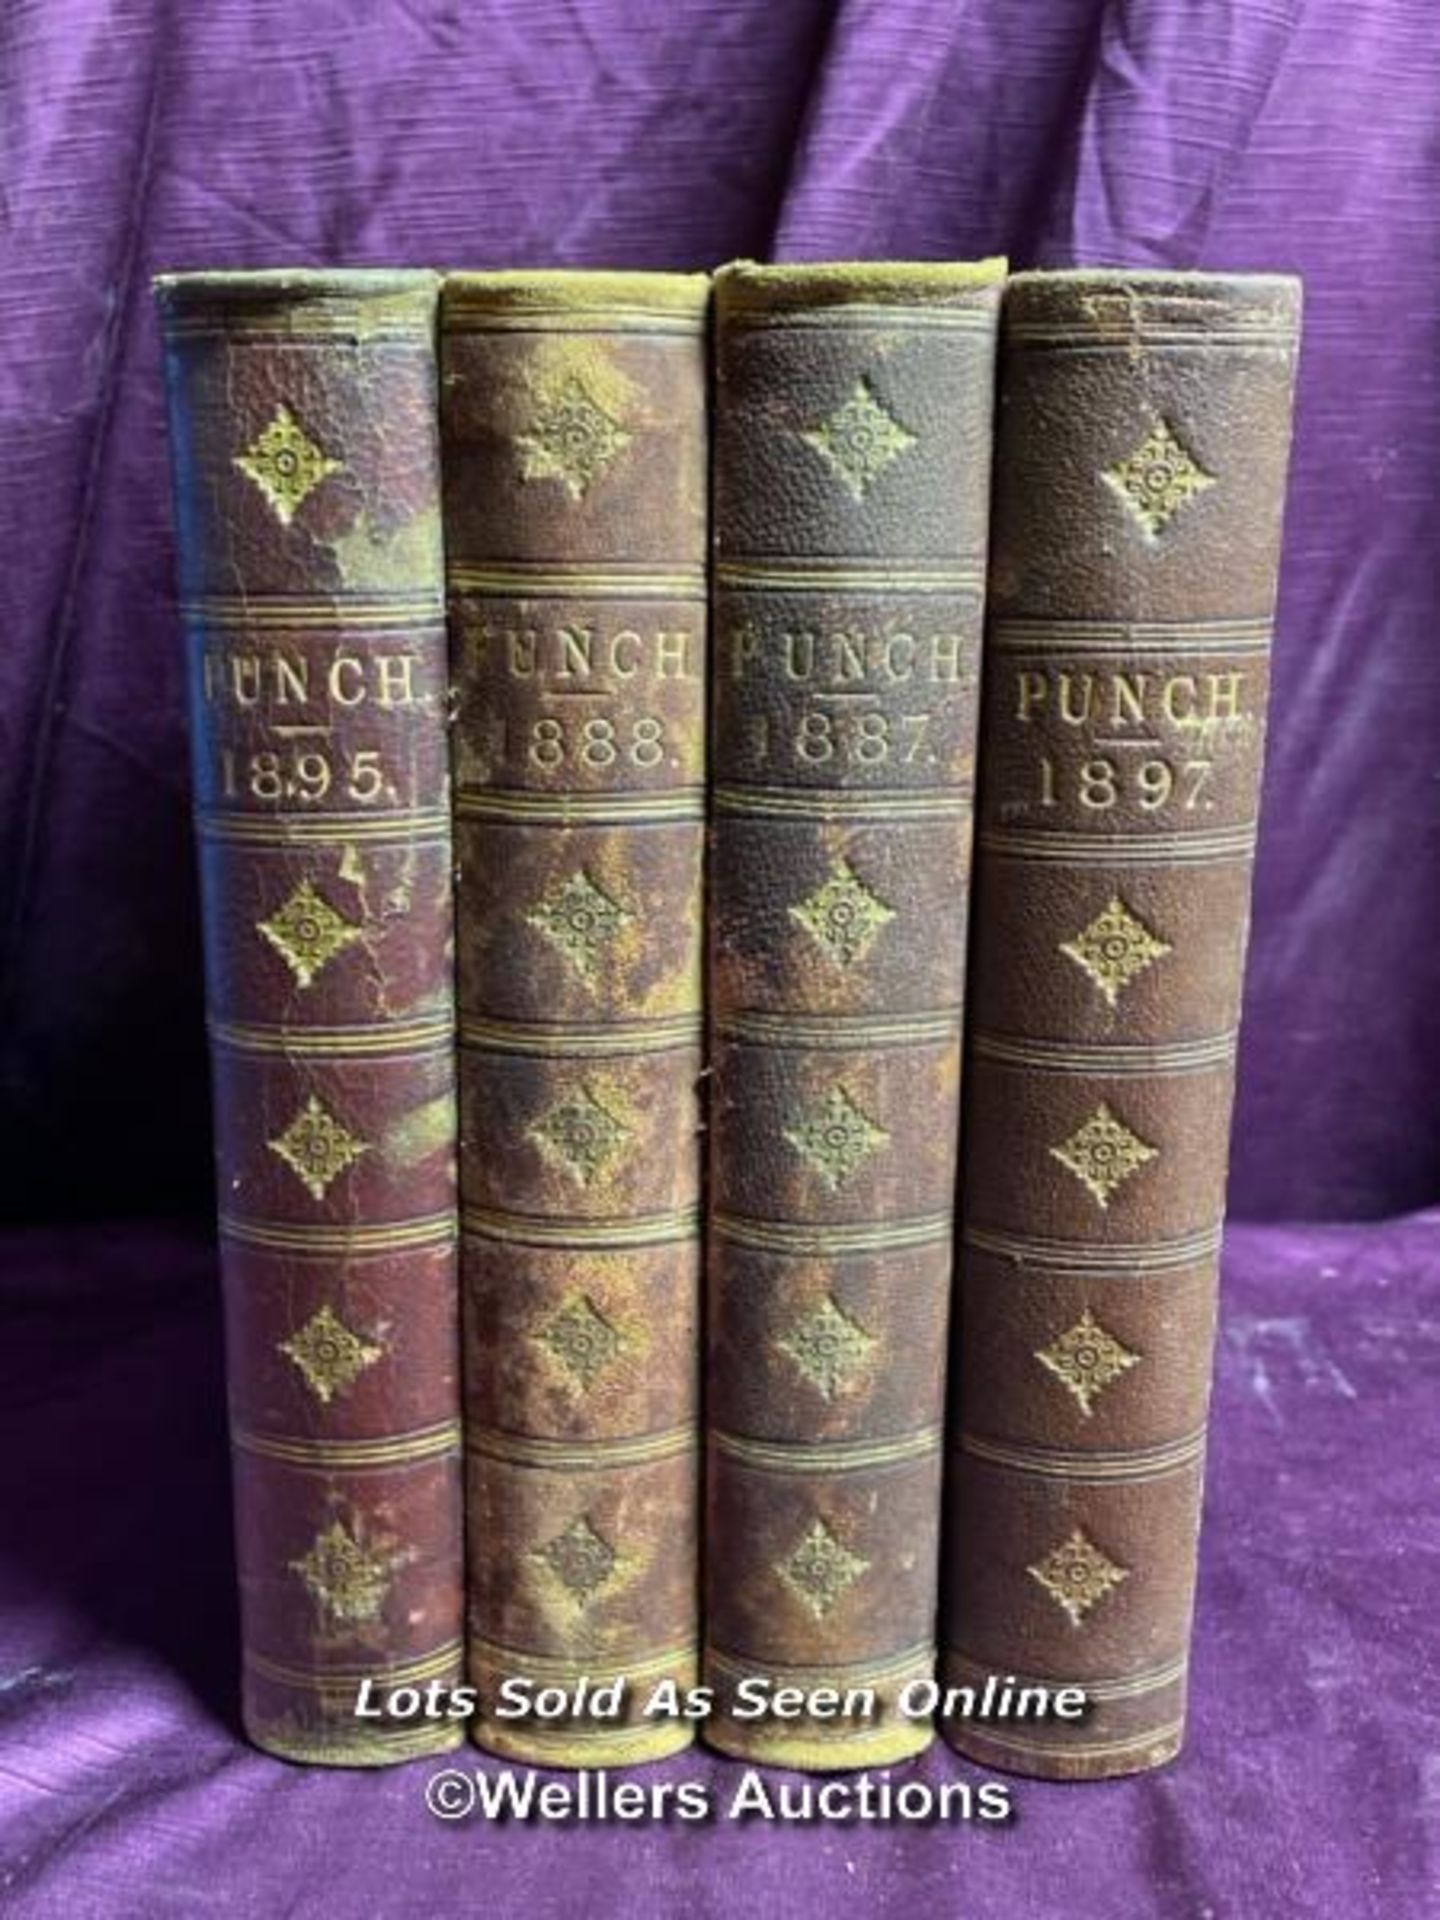 FOUR VOLUMES OF PUNCH - 1887, 1888, 1897, 1895